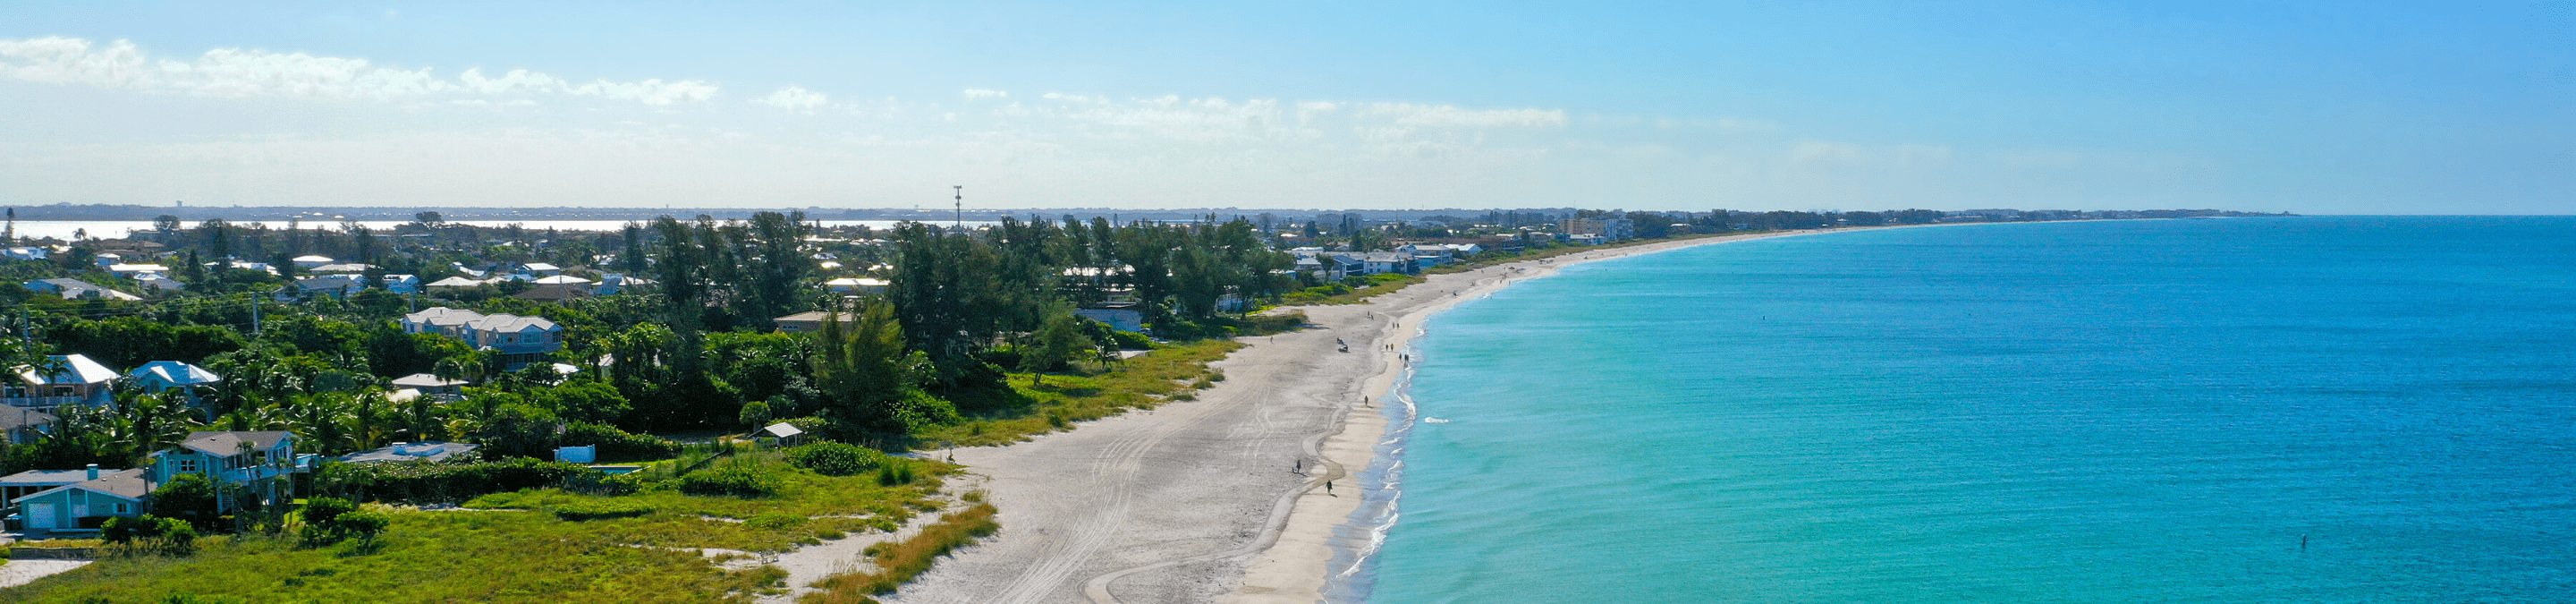 Aerial view from drone looking at the northern part of the beach on Anna Maria Island on a bright sunny day with the gulf of Mexico on the right